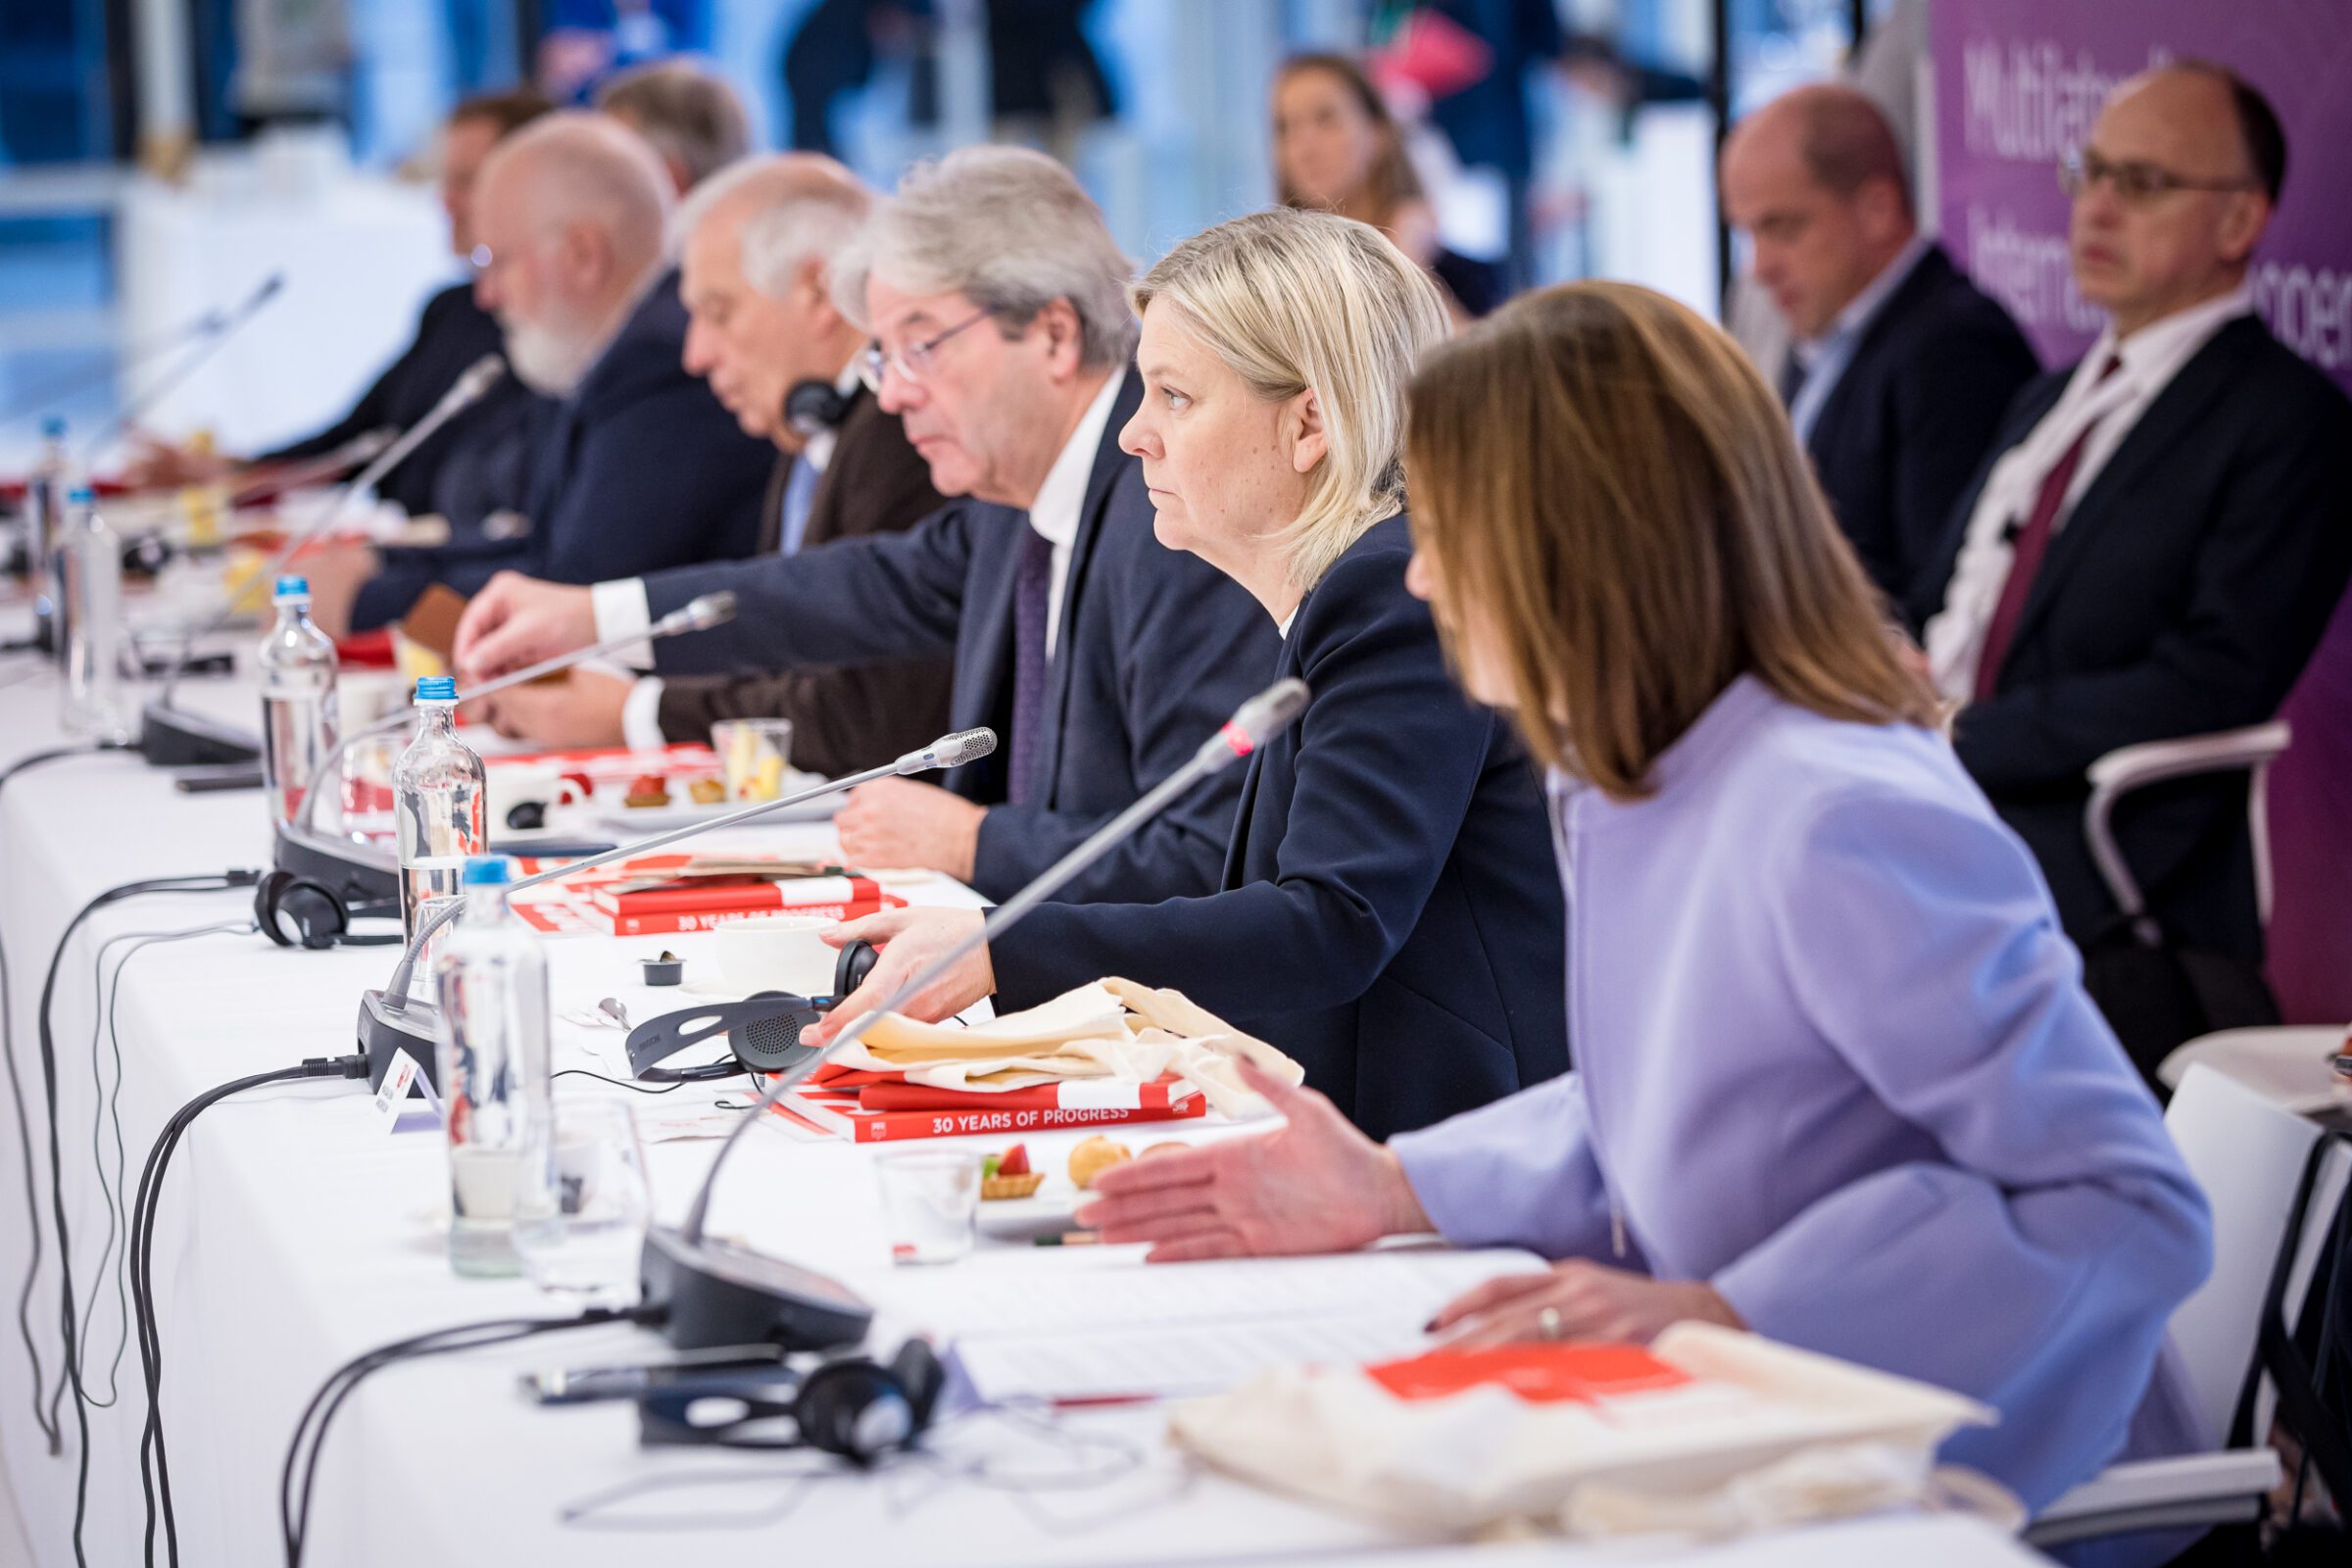 European Commission Executive Vice-President Frans Timmermans, EU High Representative Josep Borrell, European Commissioner Paolo Gentiloni, SAP Sweden leader Magdalena Andersson, and Slovenian Deputy Prime Minister and Minister for Foreign Affairs Tanja Fajon.